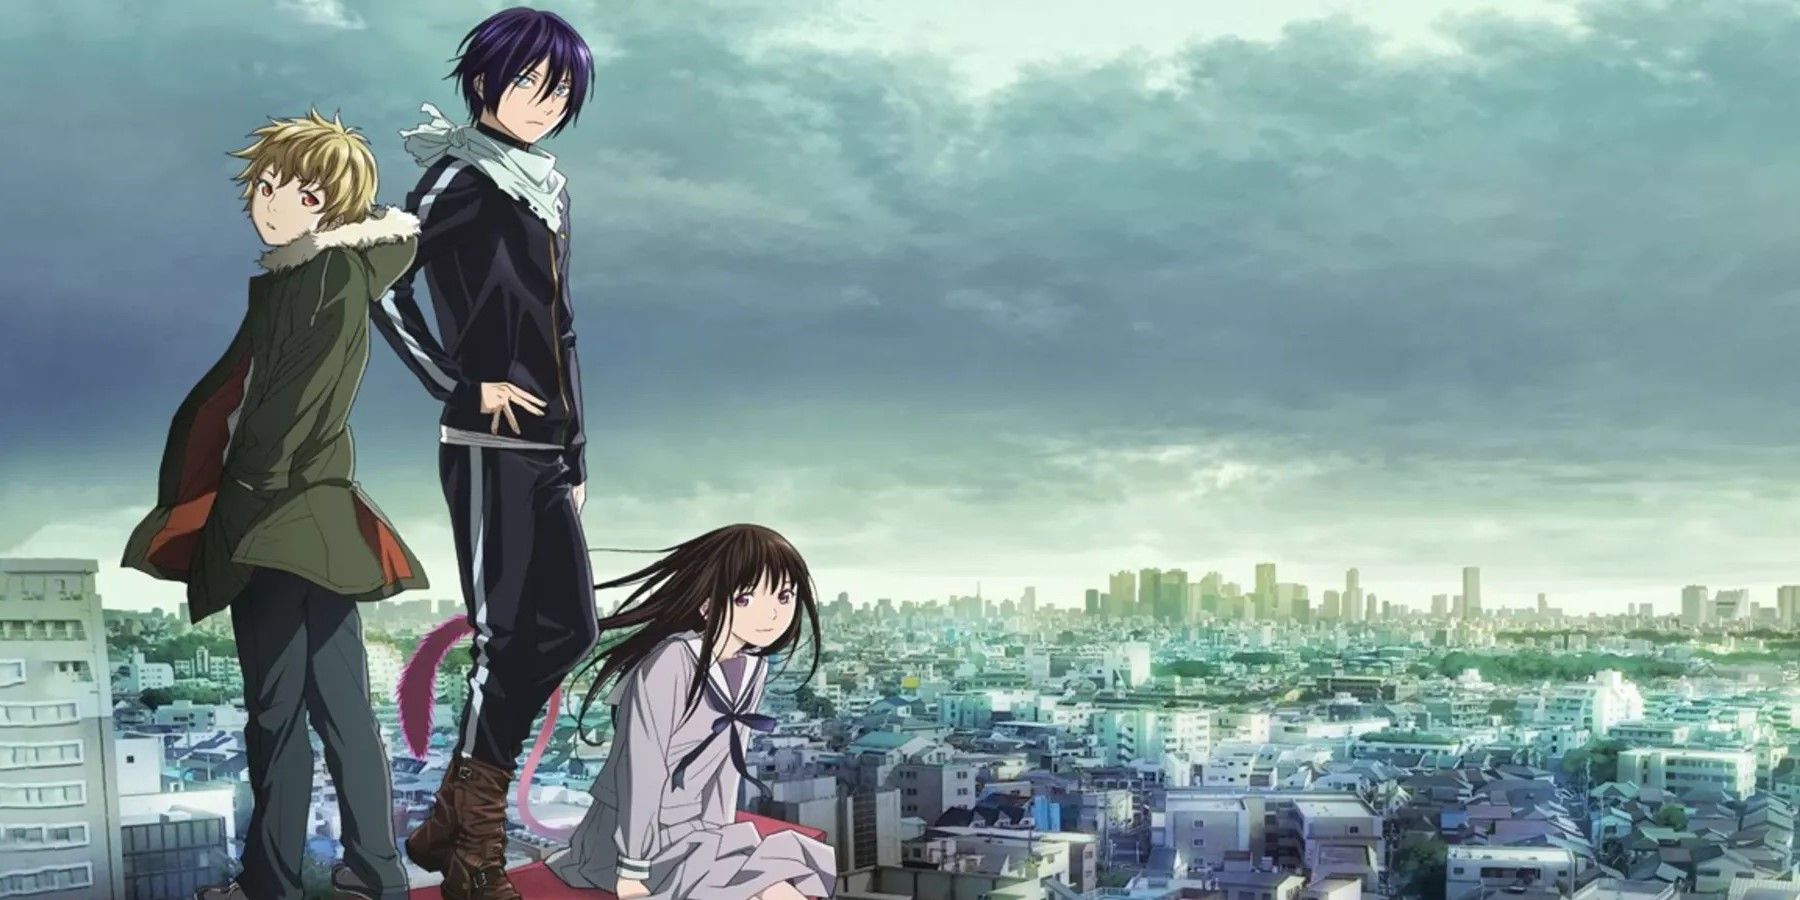 Amazon.com: Noragami: The Complete First Season - Limited Edition [Blu-ray]  : Movies & TV